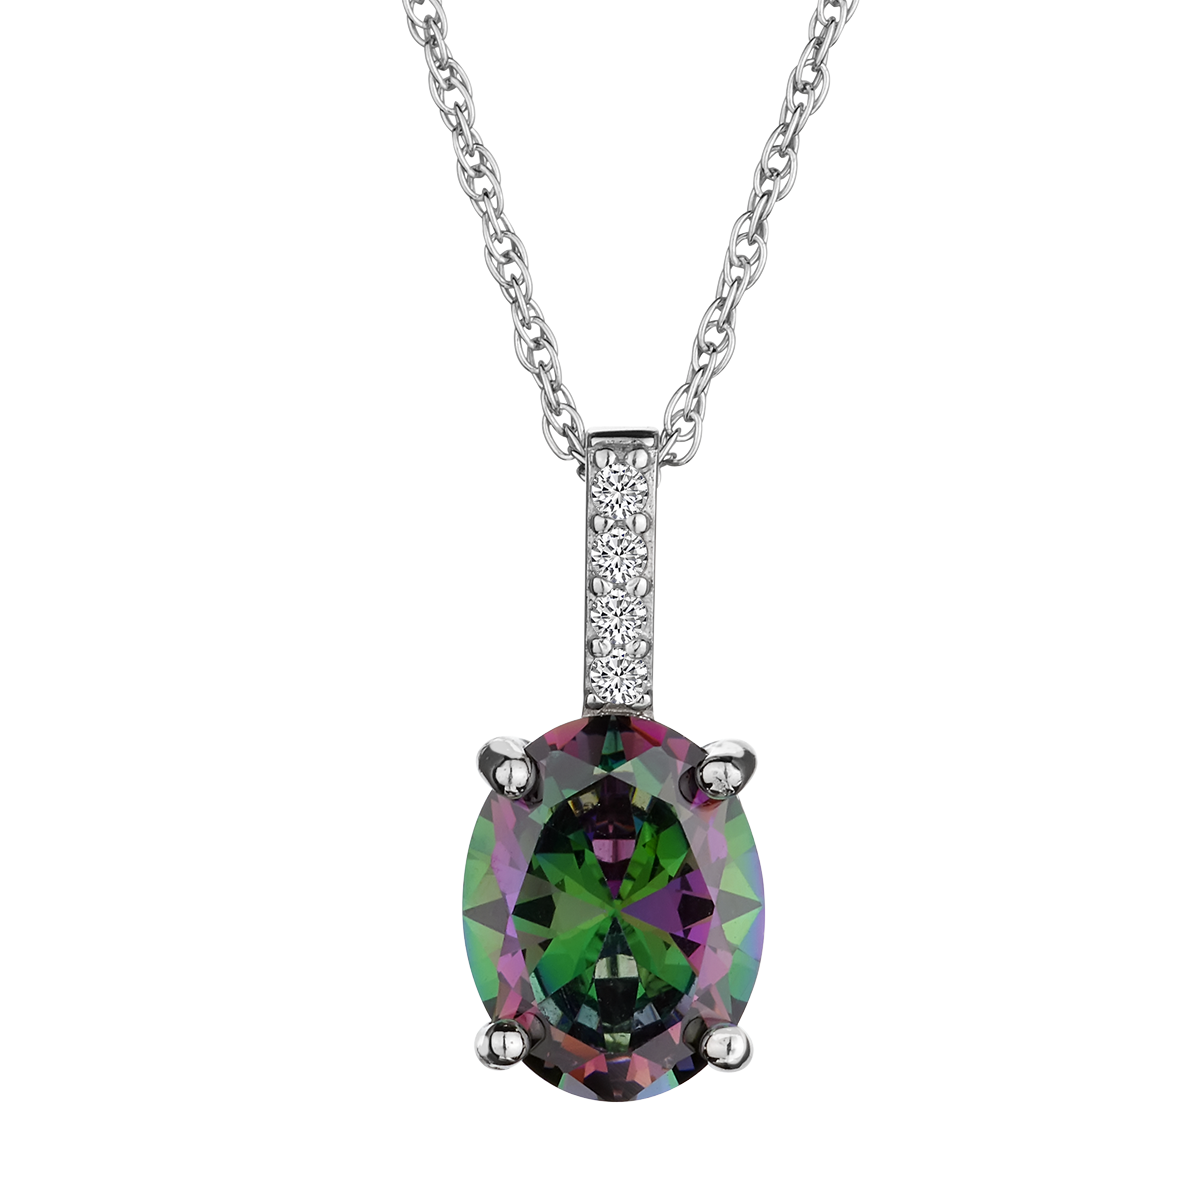 Created Mystic Topaz & White CZ Pendant,  Sterling Silver. Necklaces and Pendants. Griffin Jewellery Designs. 